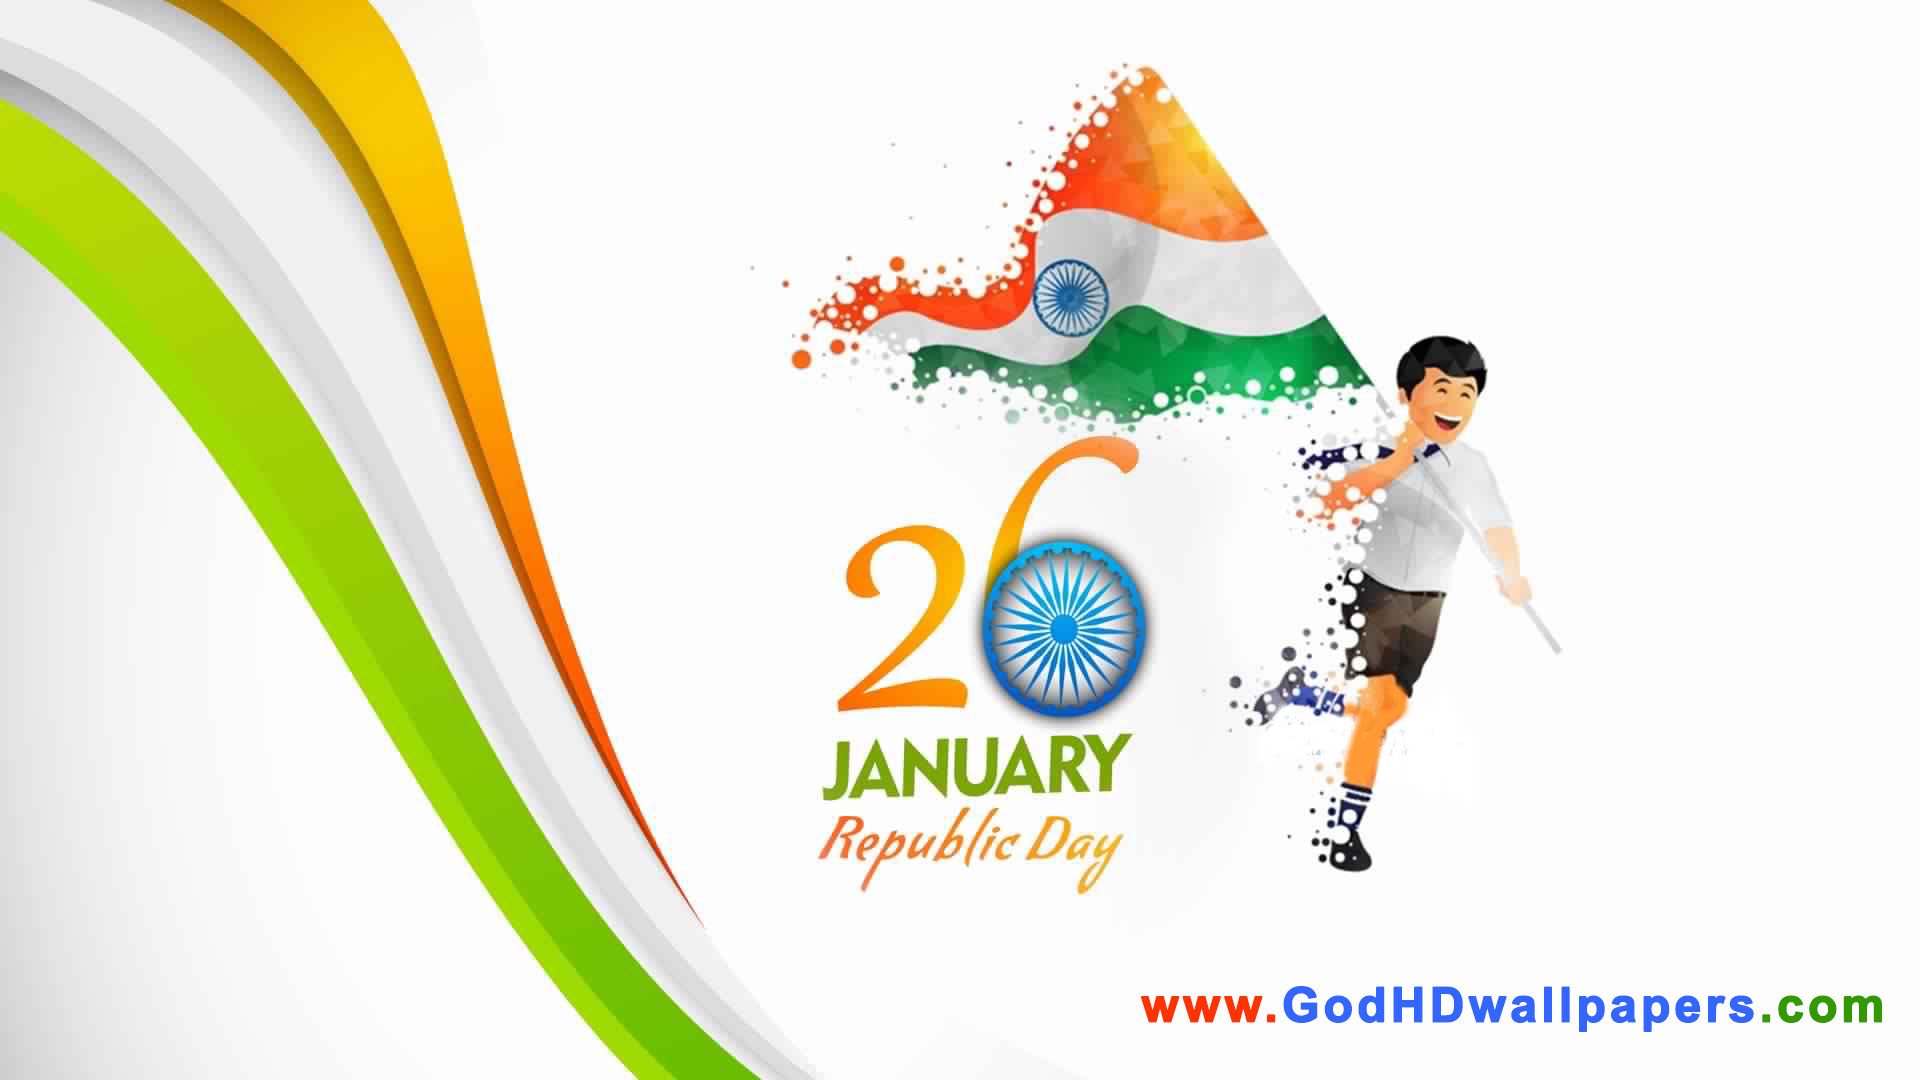 Top Quality Republic Live Wallpaper Perfect Live Wallpaper For Celebrating India Republic Day